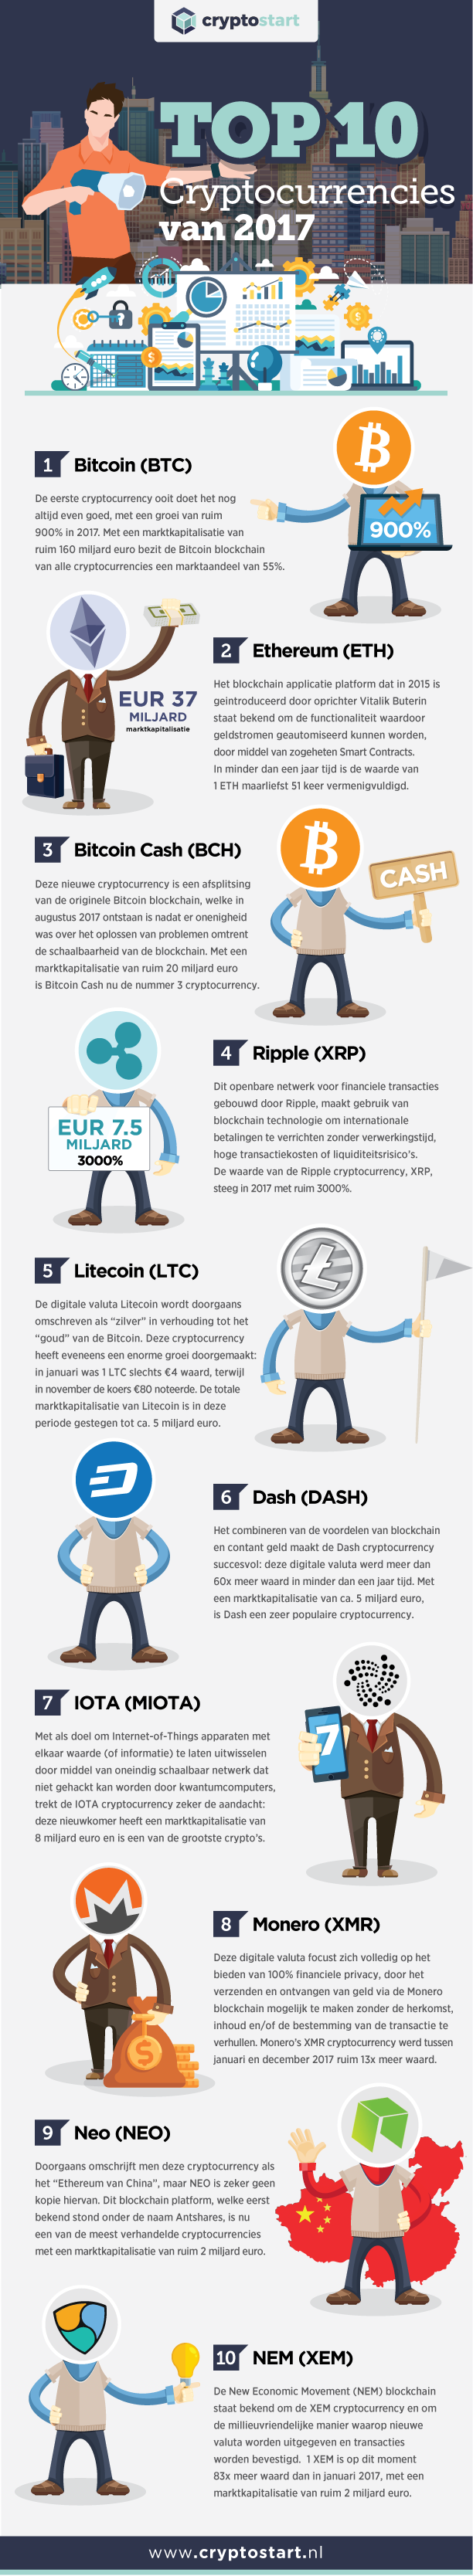 Infographic Cryptocurrency